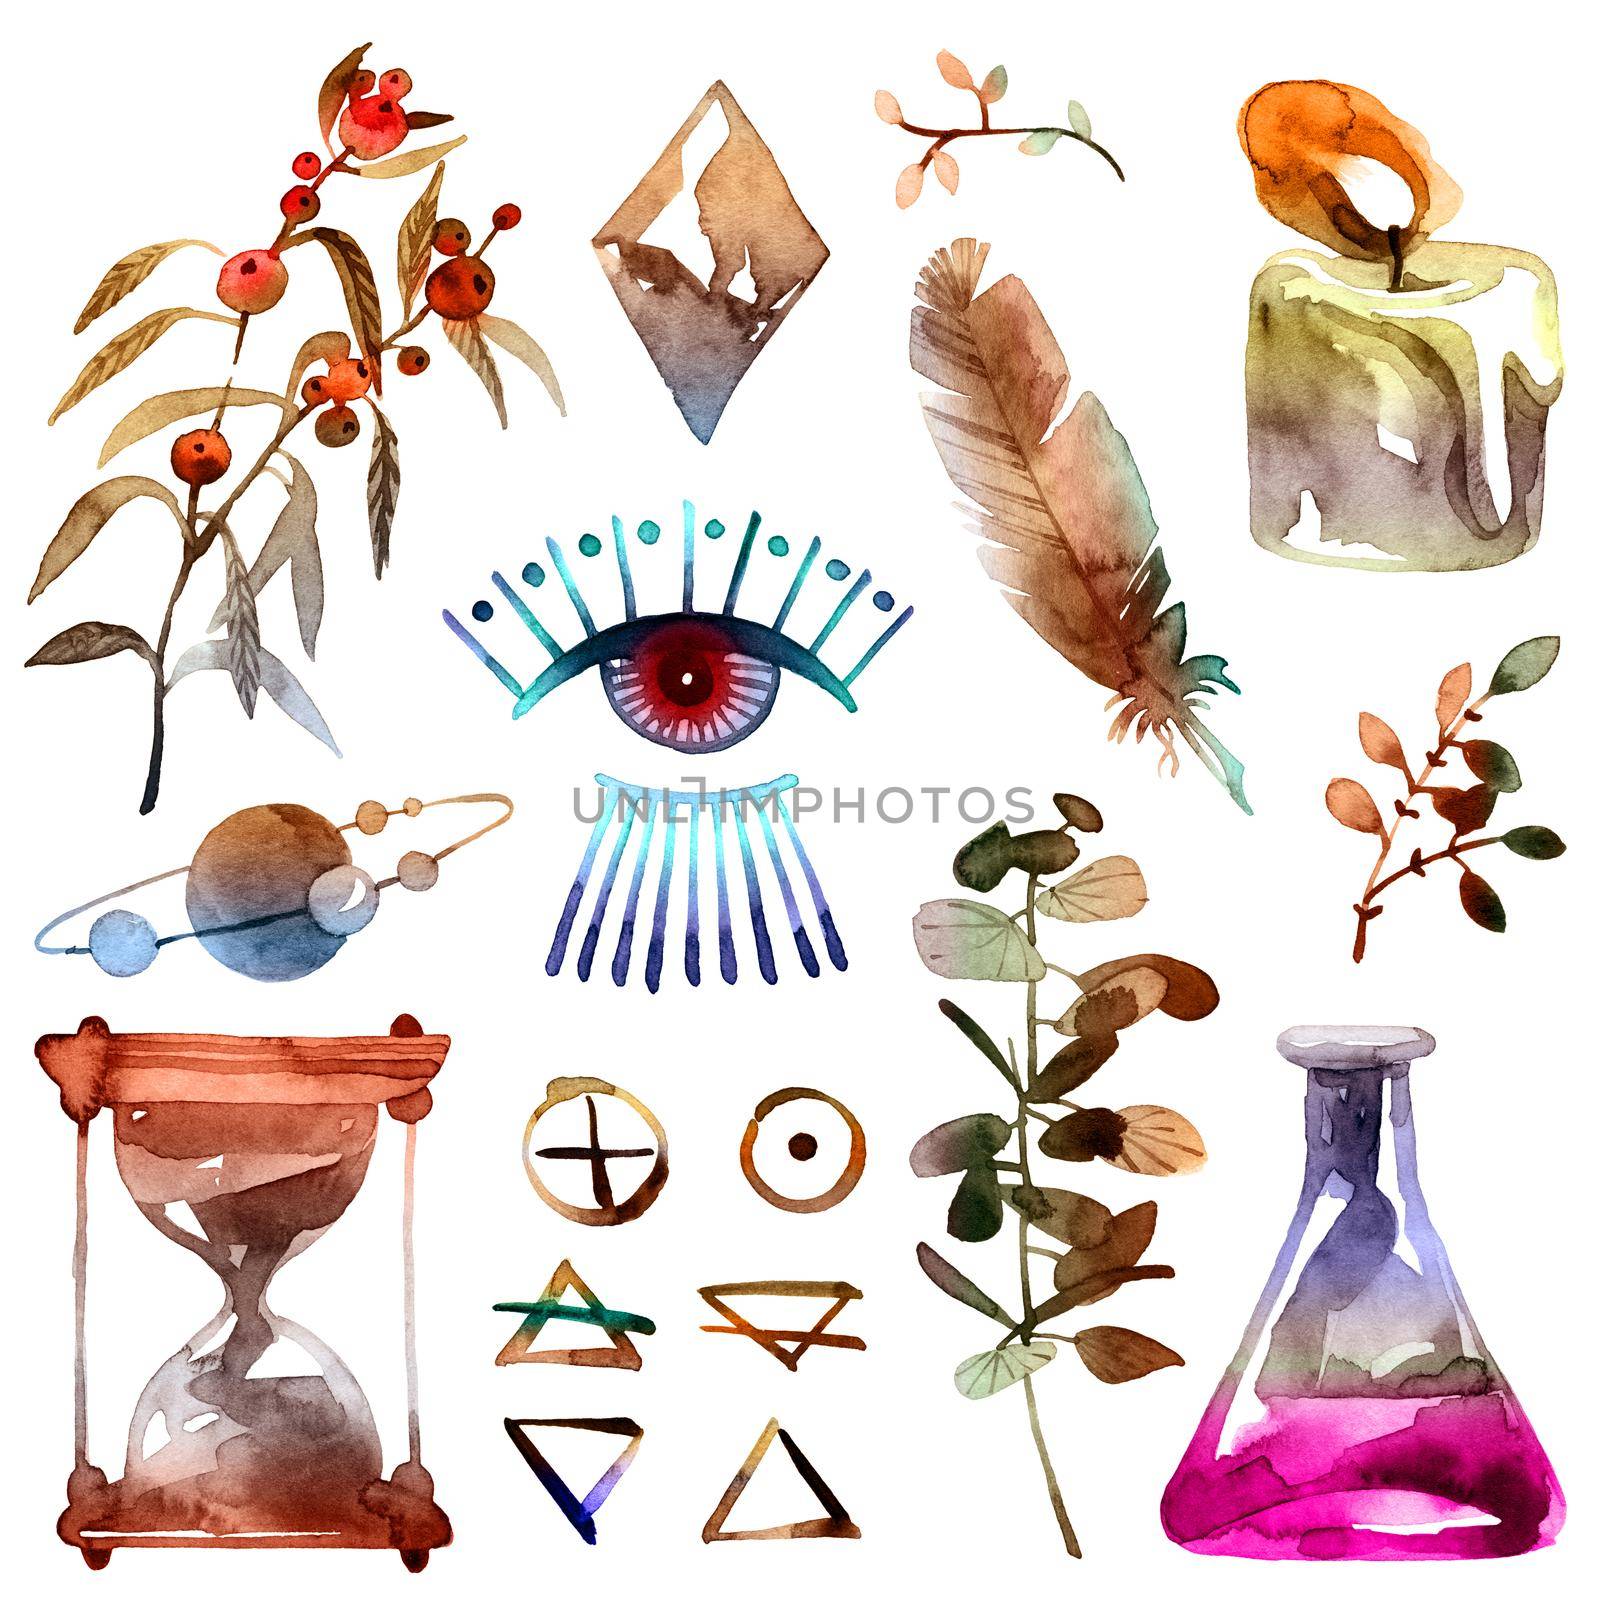 Watercolor illustration of alchemy objects and signs on white background